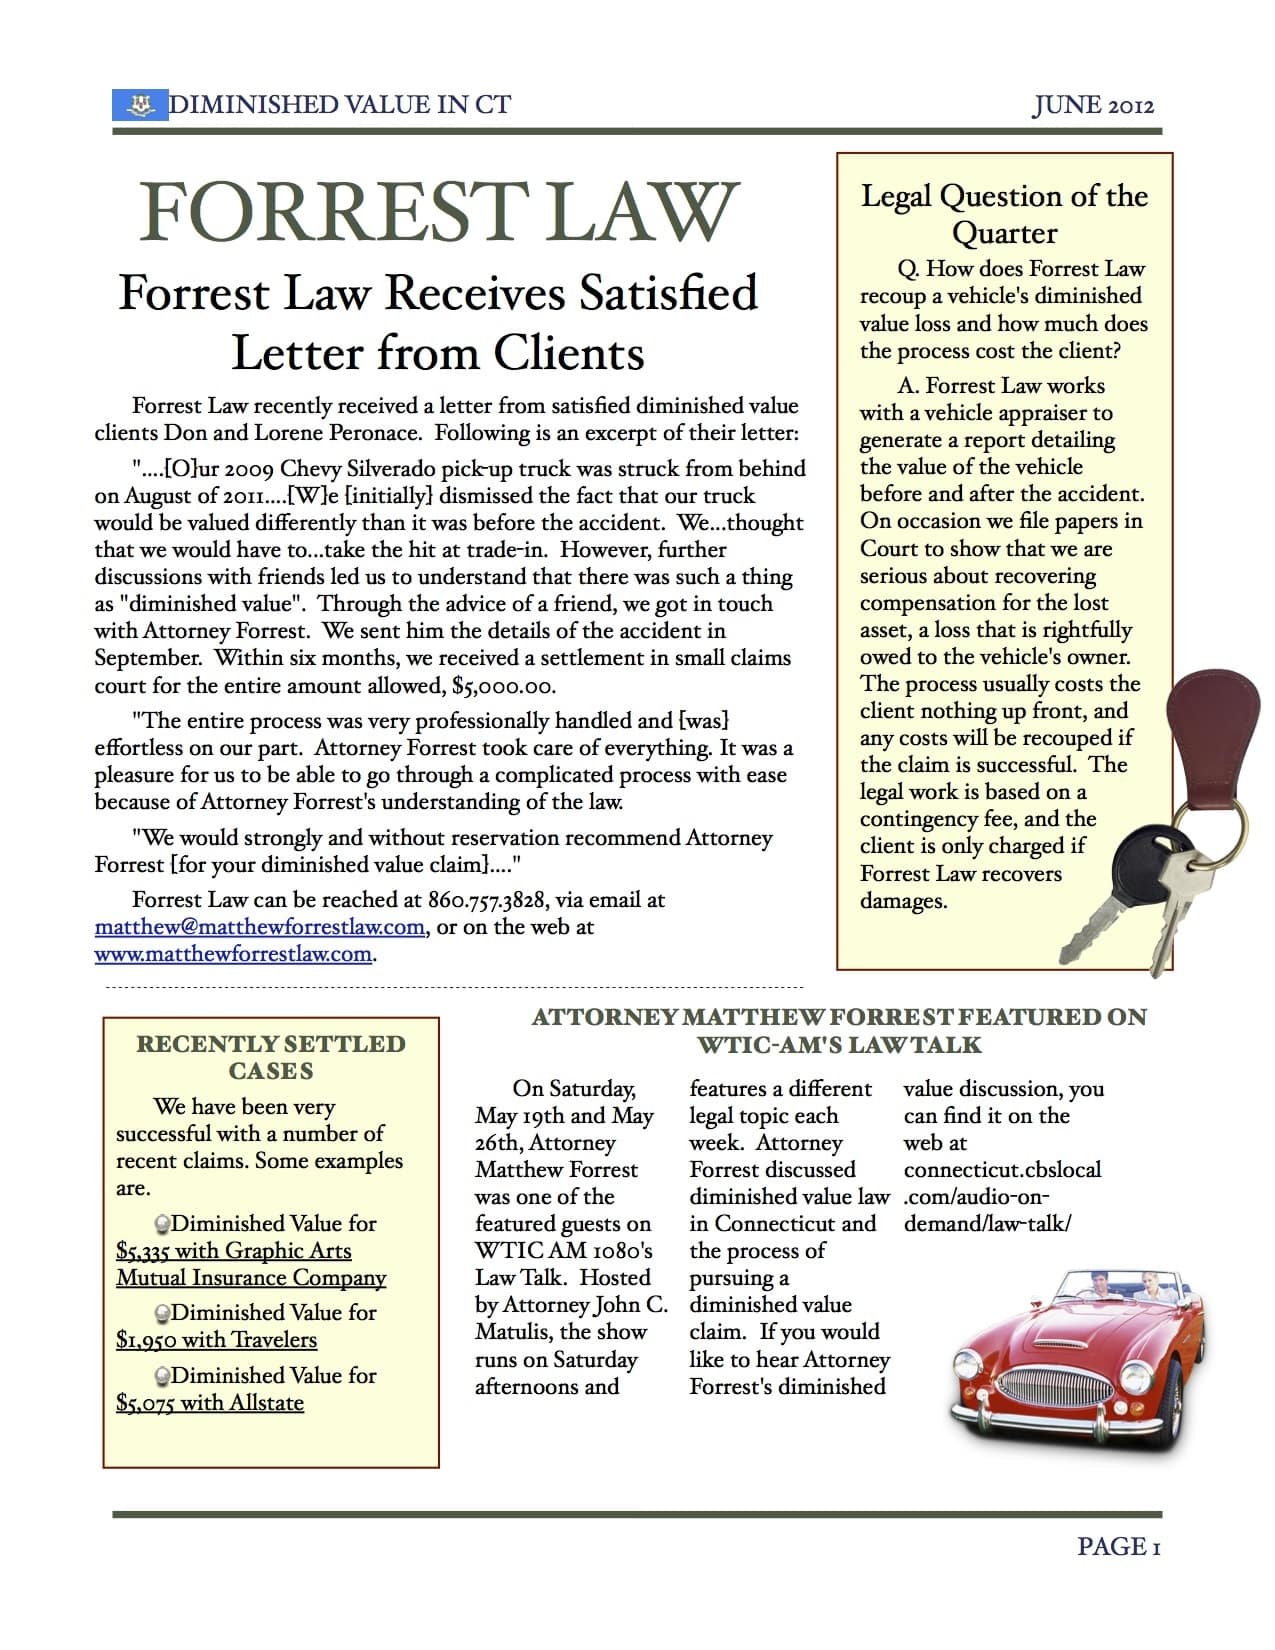 Forrest Law Diminished Value Newsletter Highlights Law Talk and Client’s Story